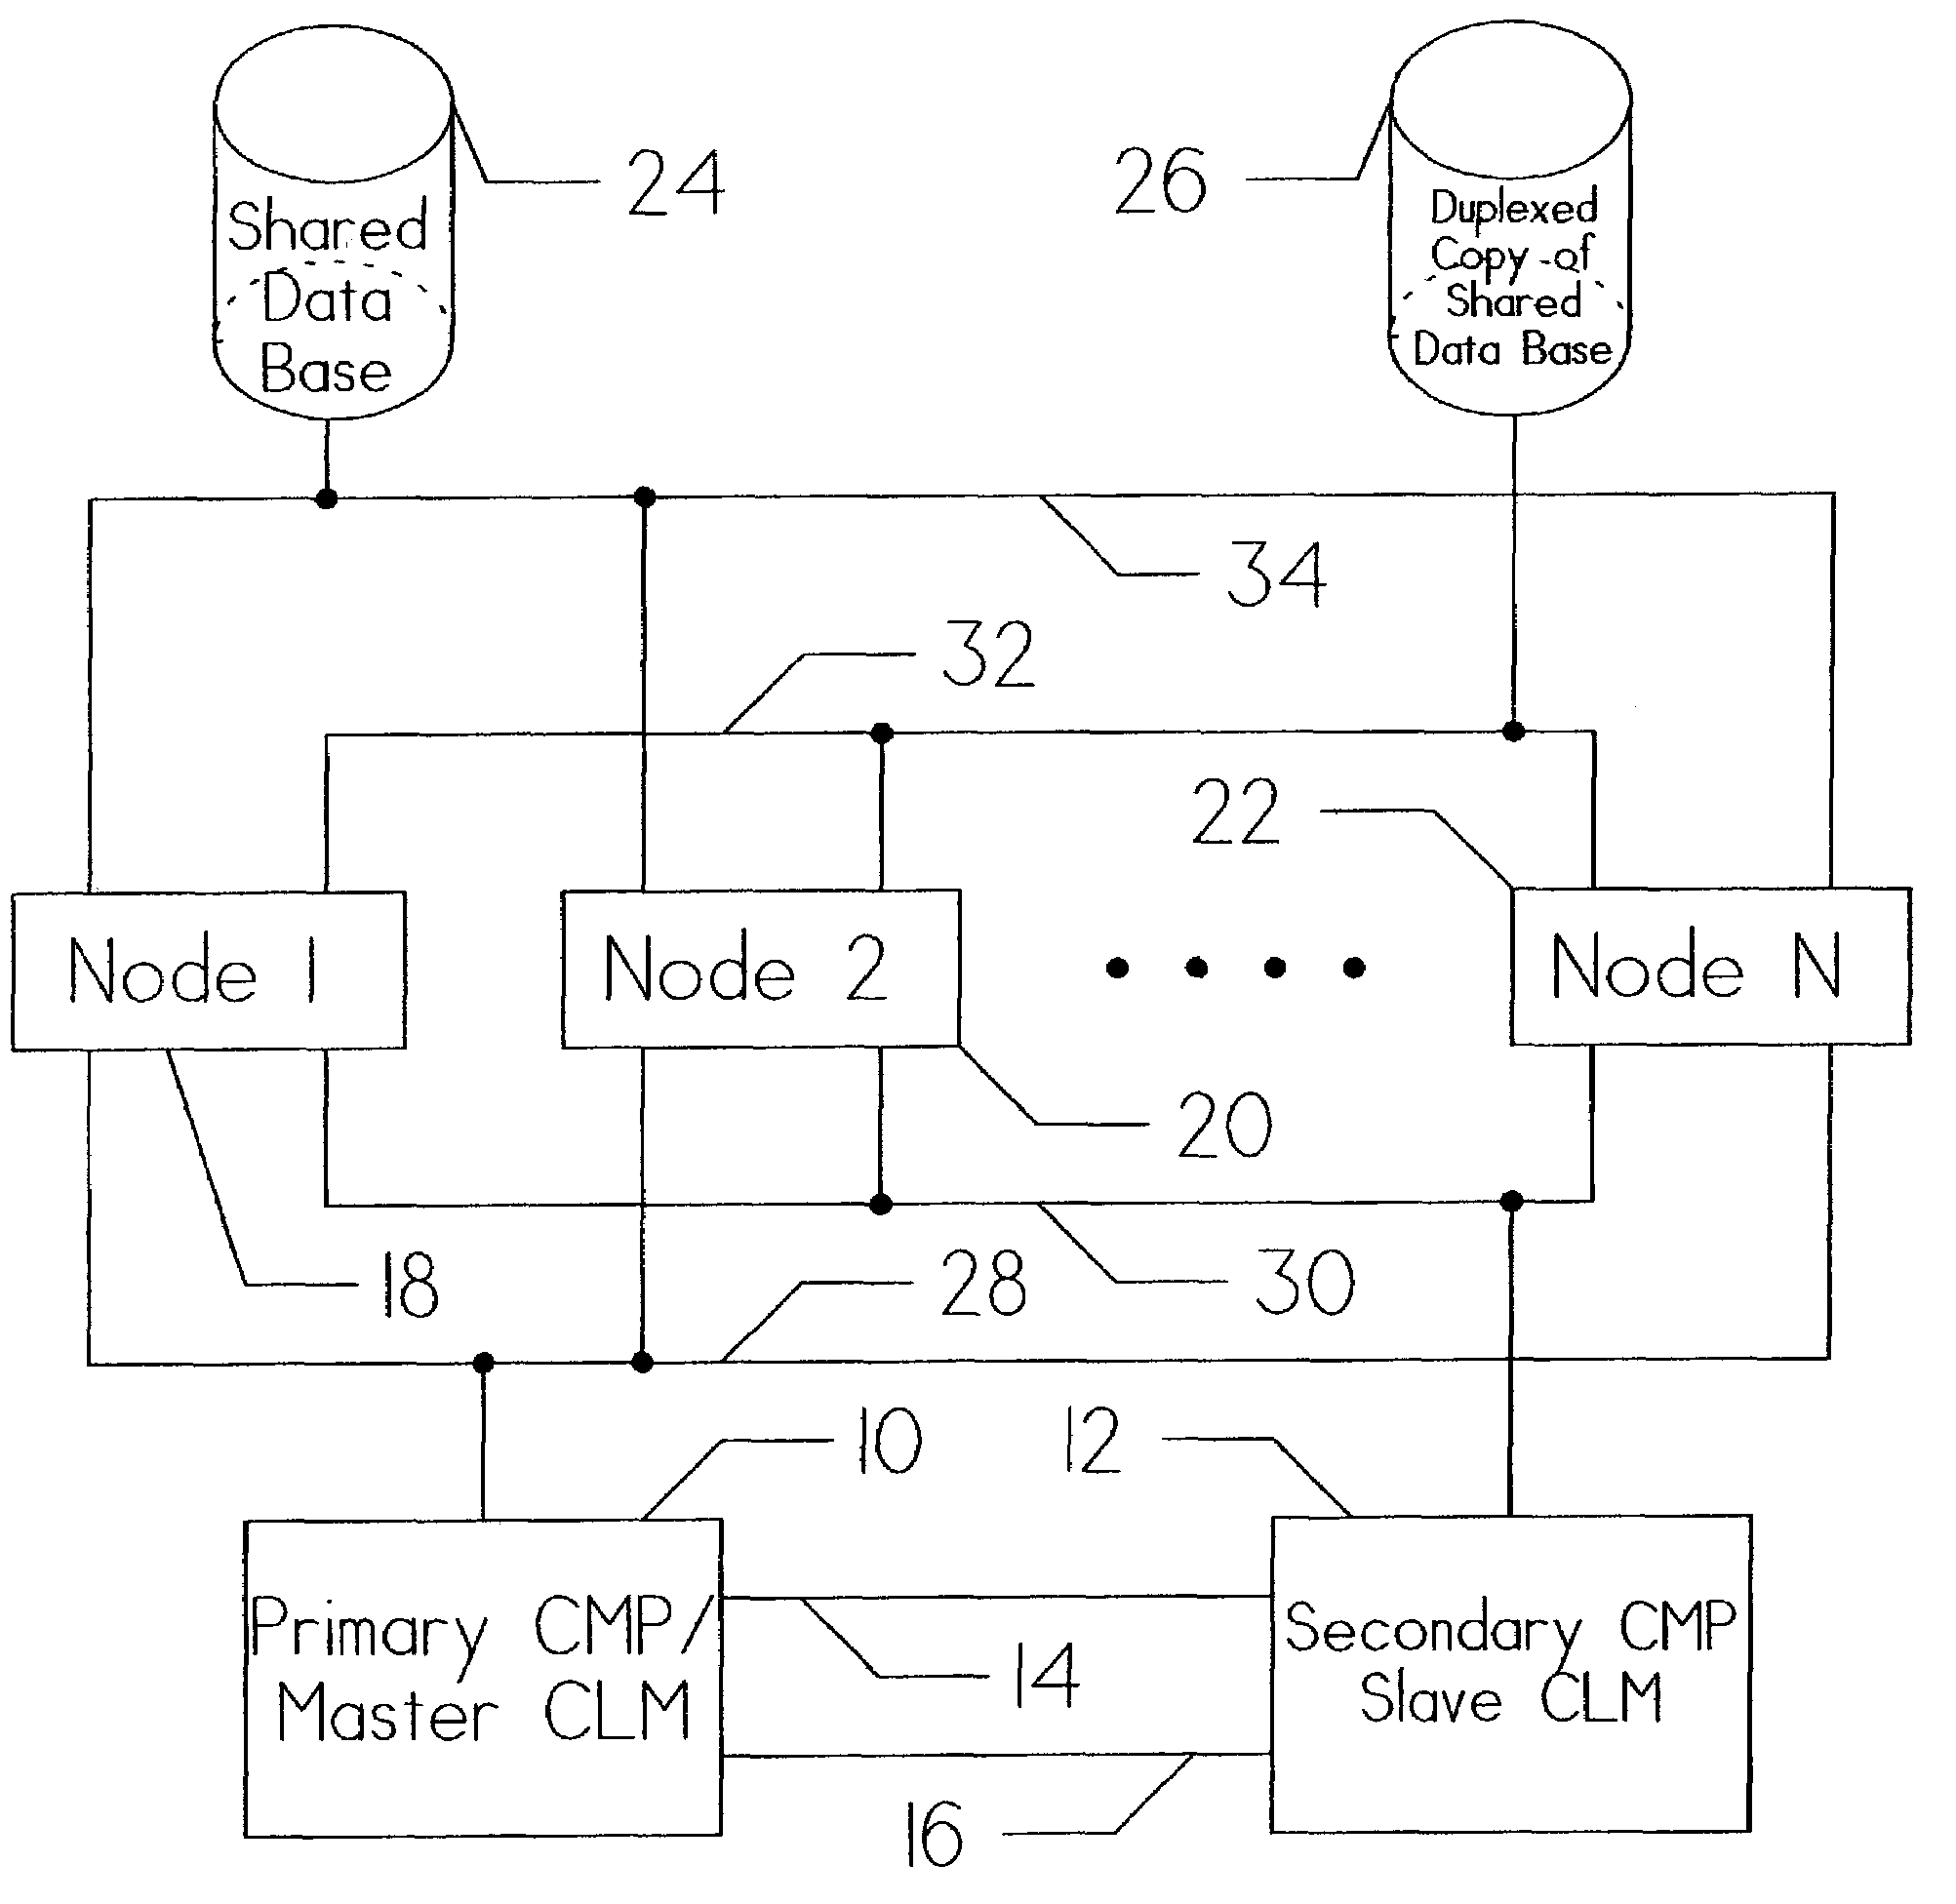 Method for distributing the processing among multiple synchronization paths in a computer system utilizing separate servers for redundancy